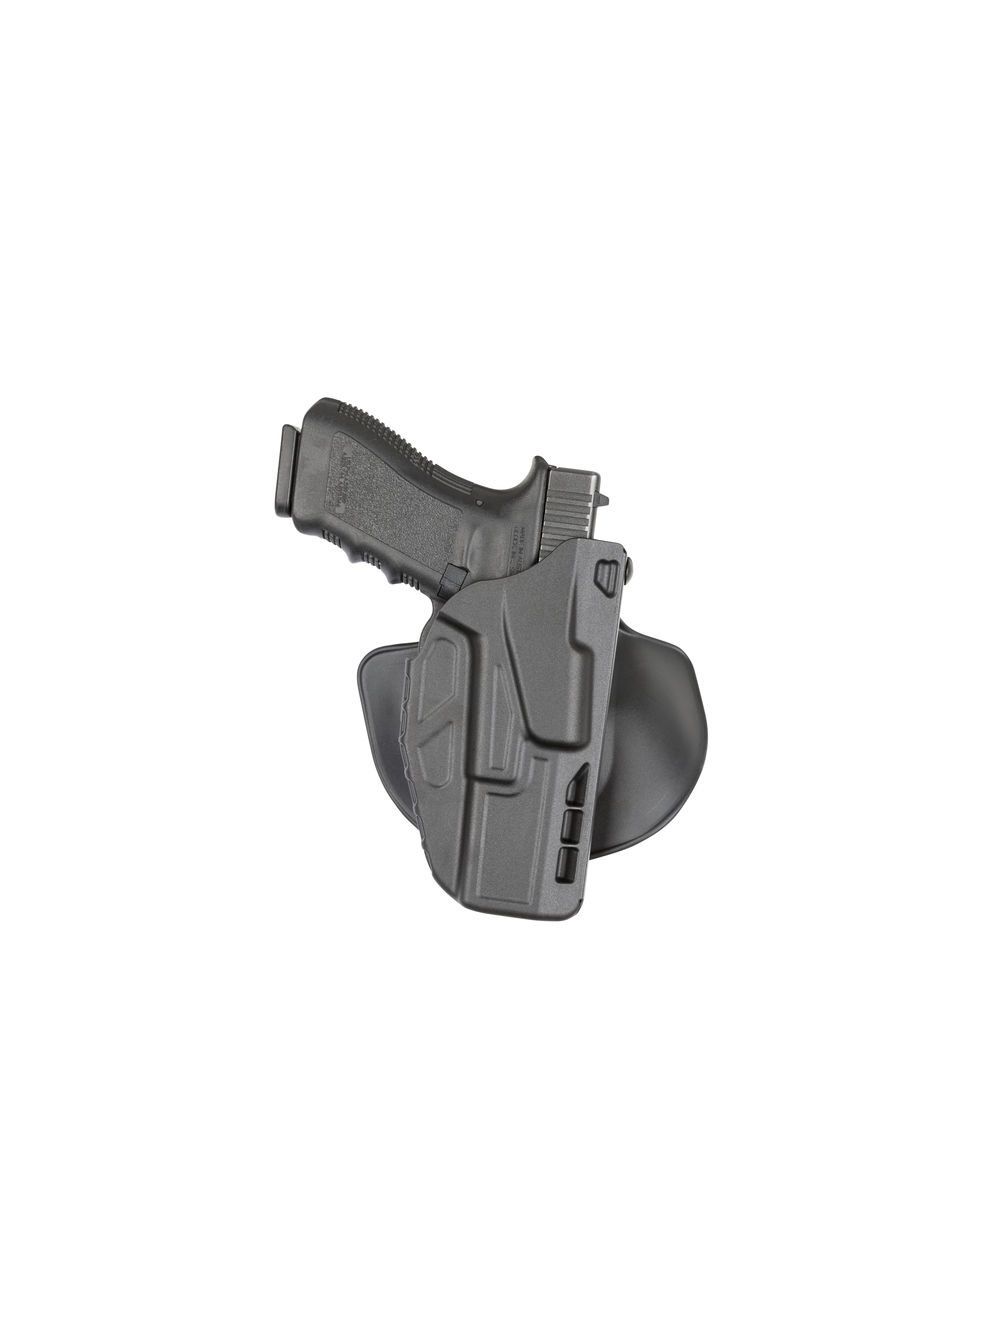 Model 7378 7TS ALS Concealment Paddle and Belt Loop Combo Holster for Glock 19